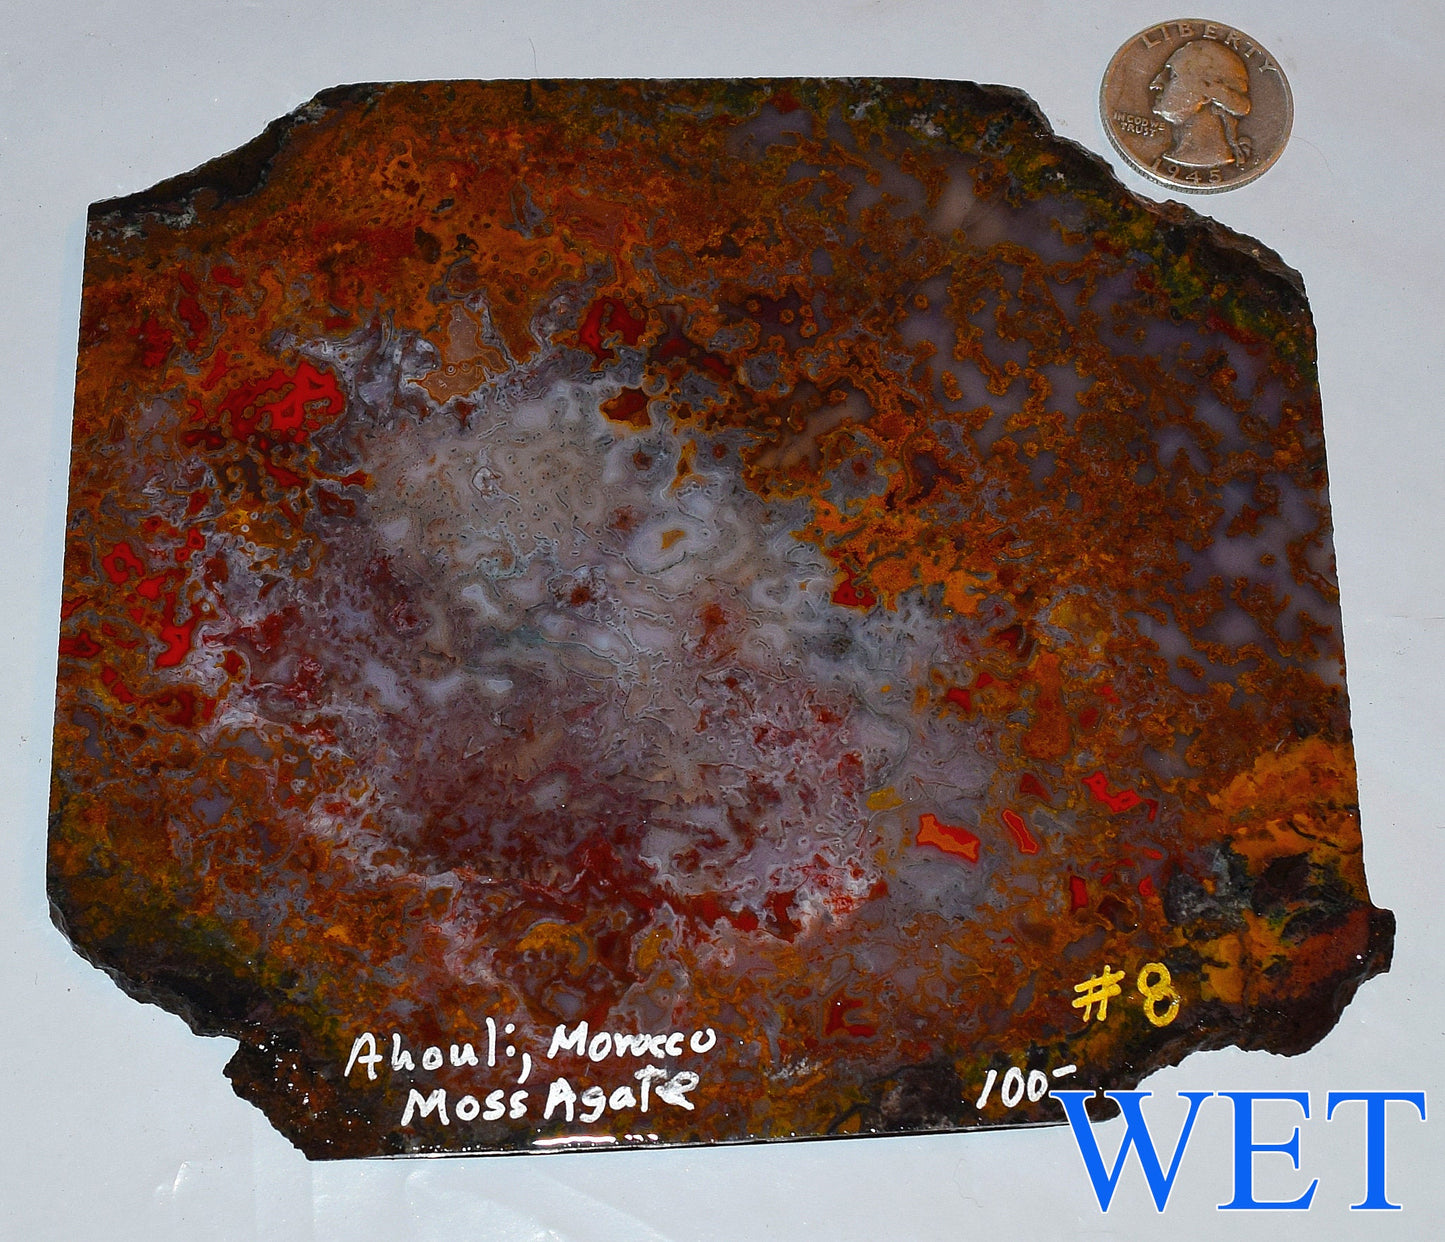 Rare, multi-colored moss agate from the Ahouli beds in Morocco. #8